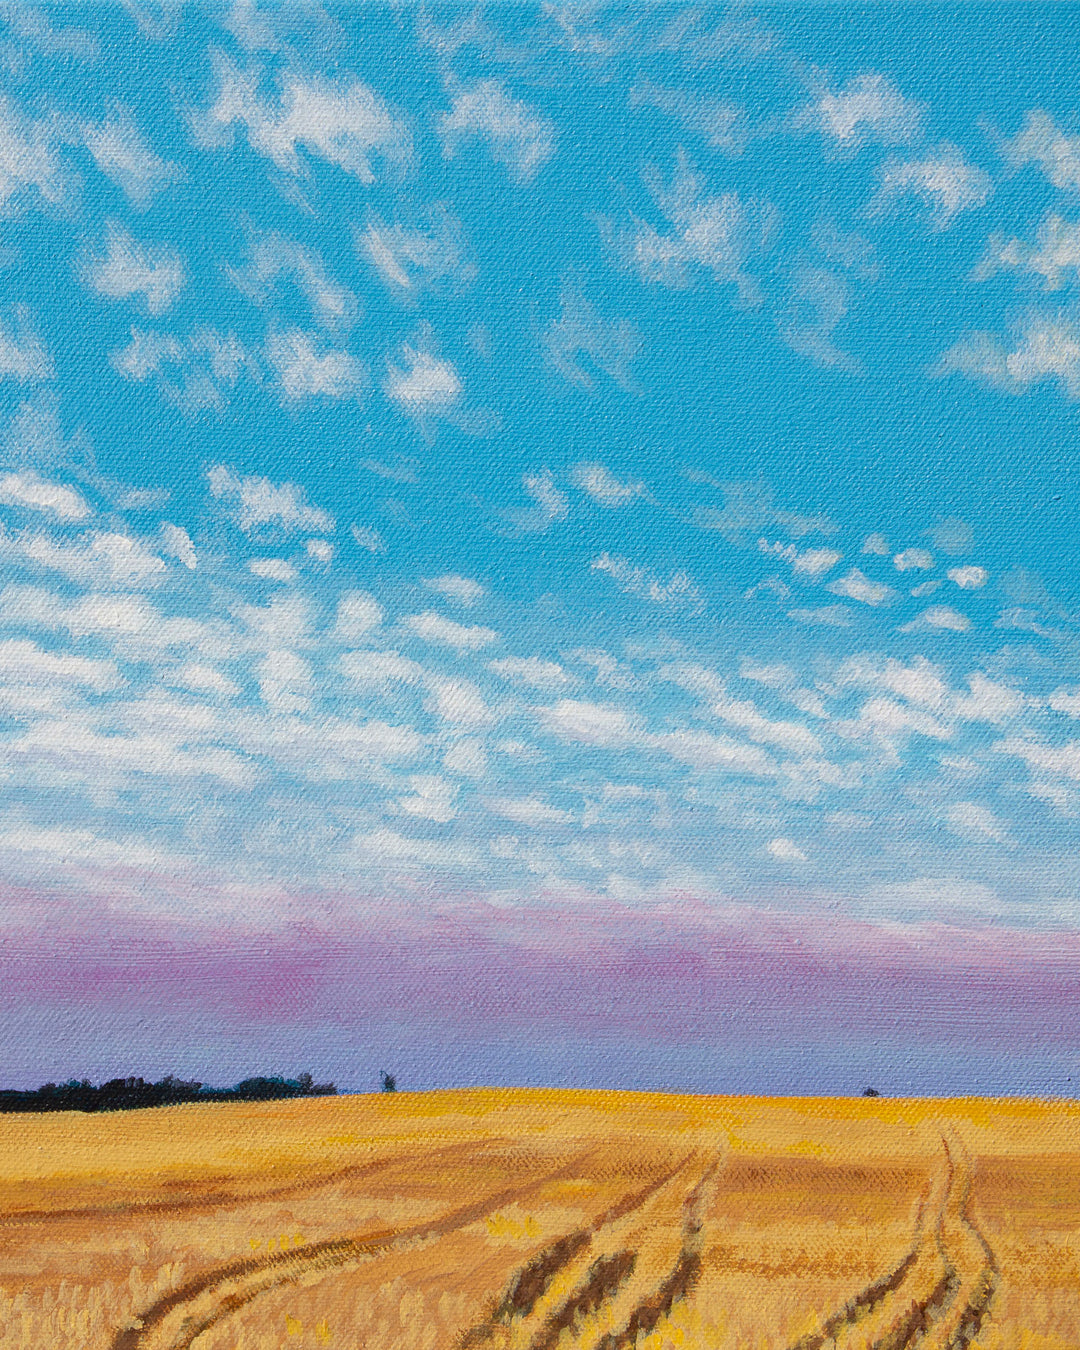 A vertical painting of freshly-cut wheat fields in the evening.